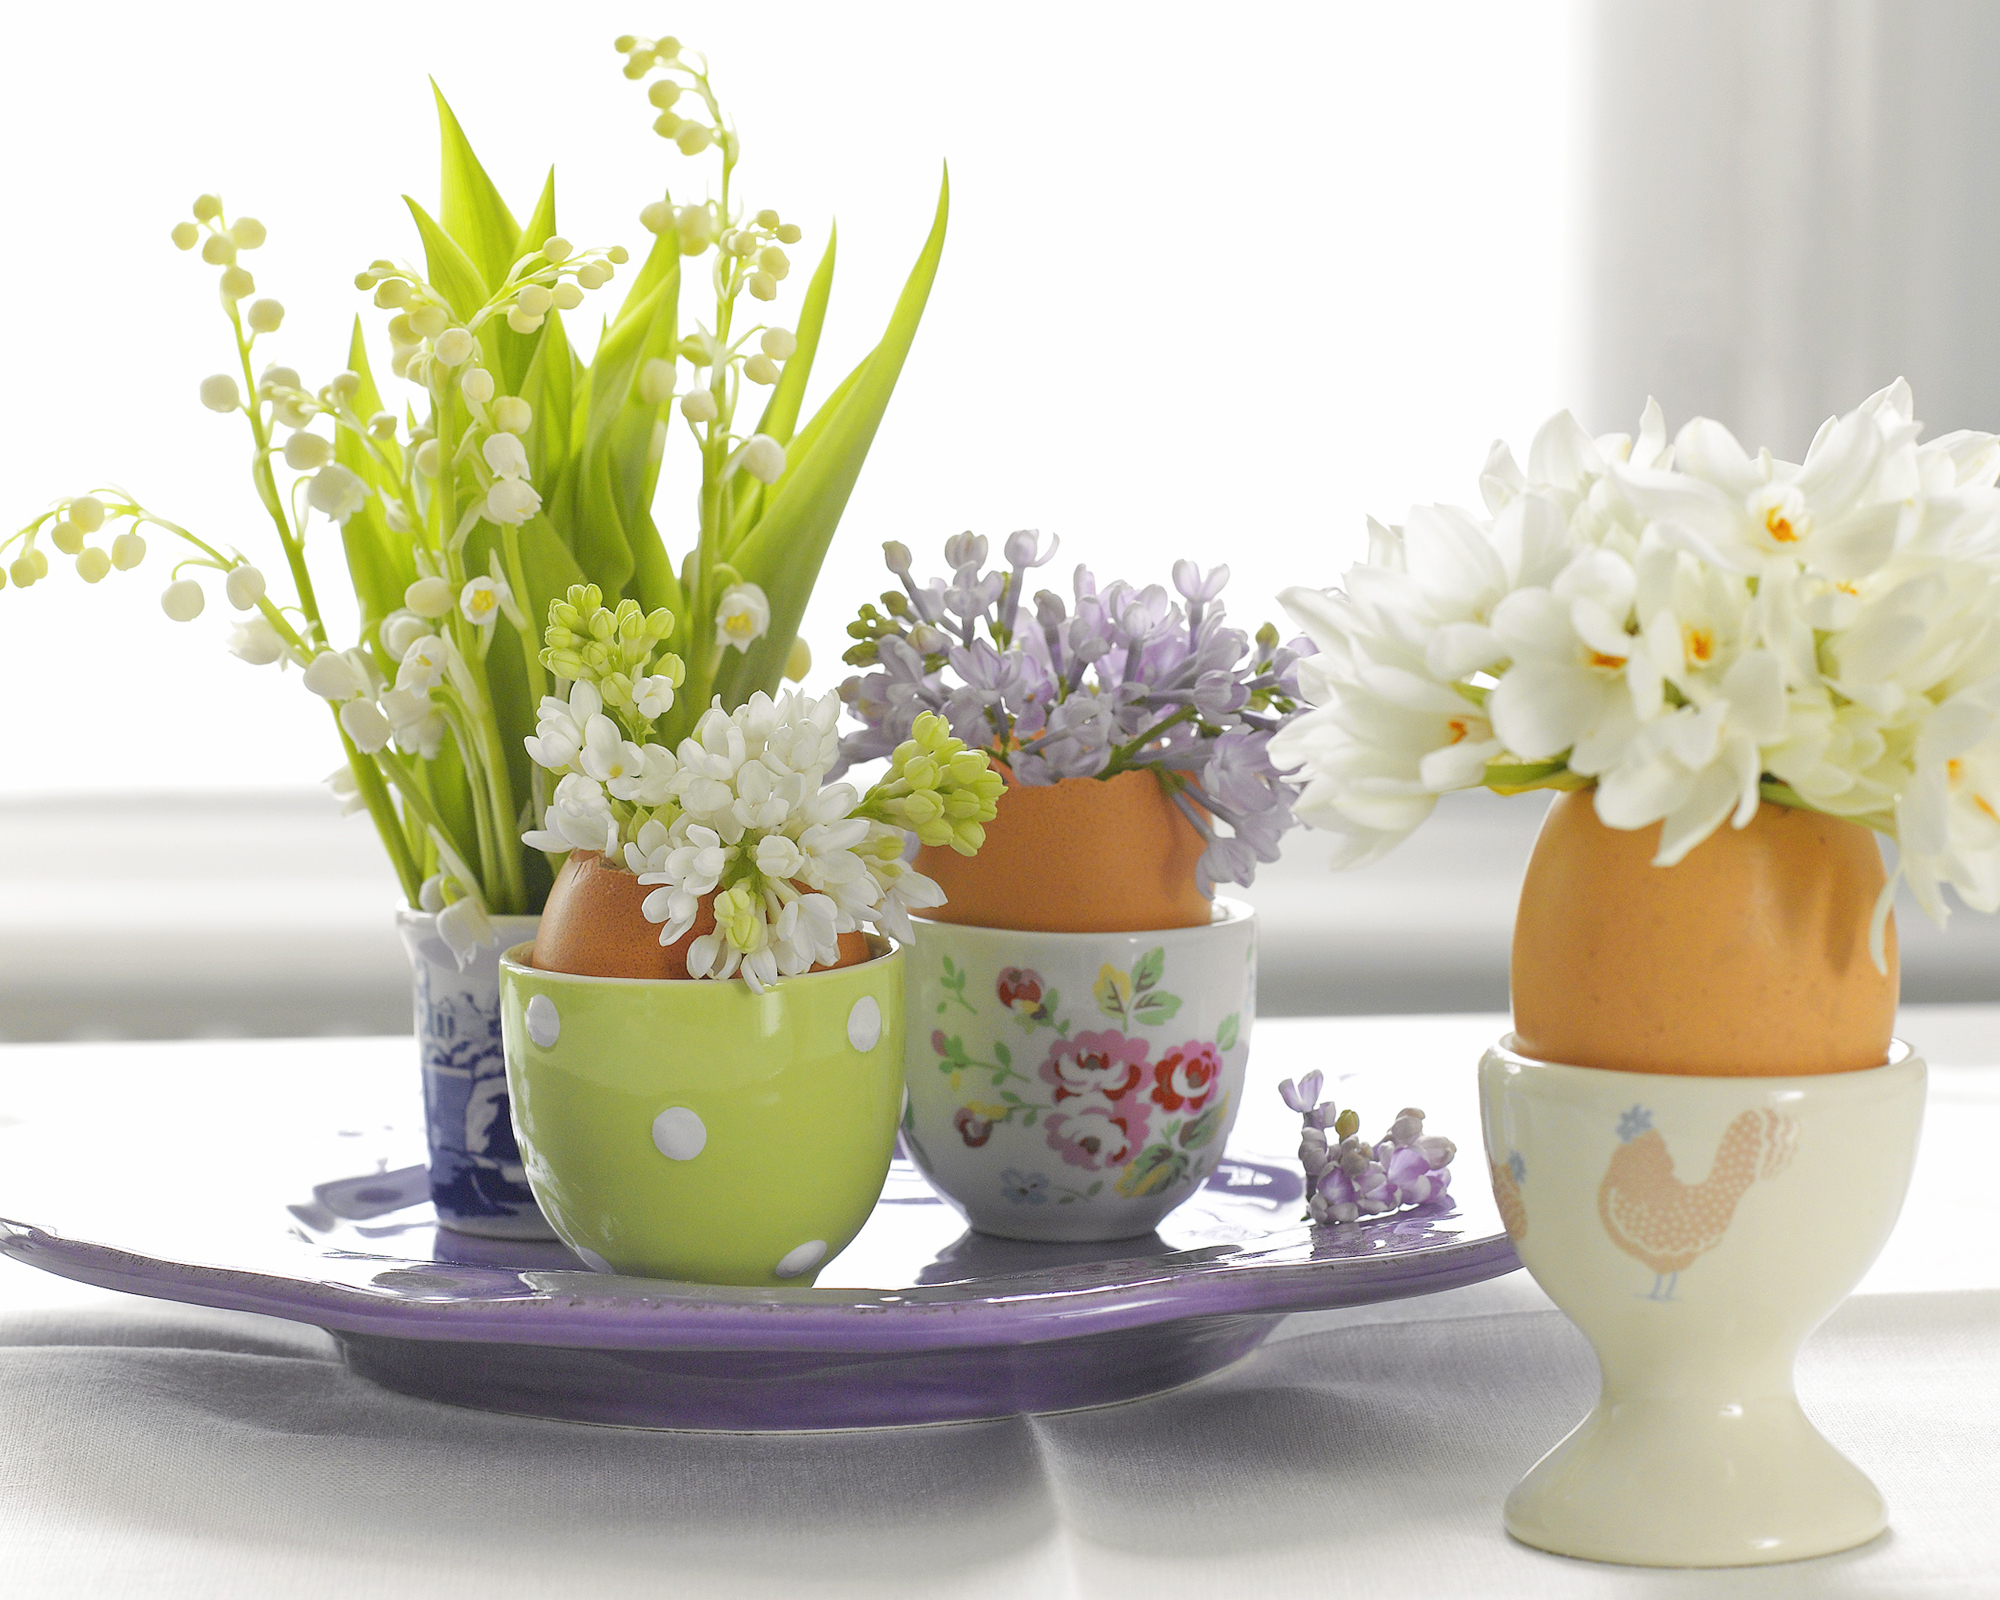 Eggs in egg cups filled with spring flowers